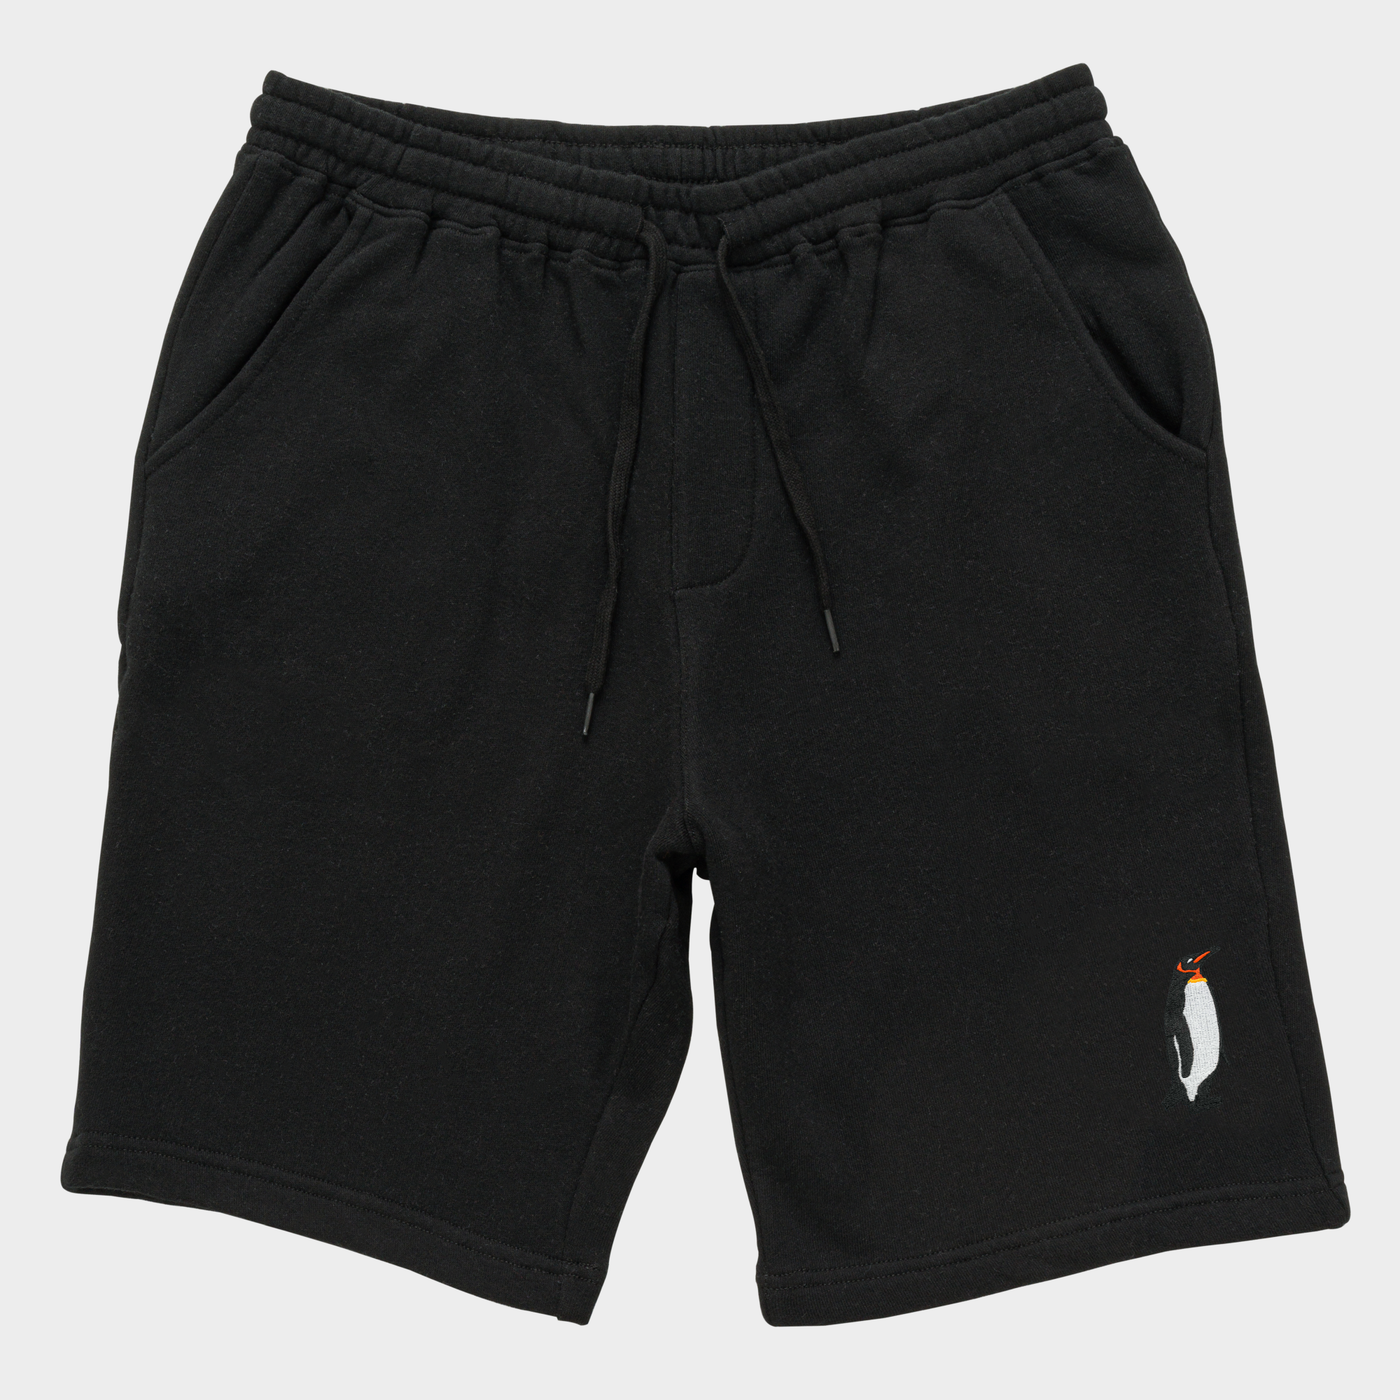 Bobby's Planet Men's Embroidered Penguin Shorts from Arctic Polar Animals Collection in Black Color#color_black